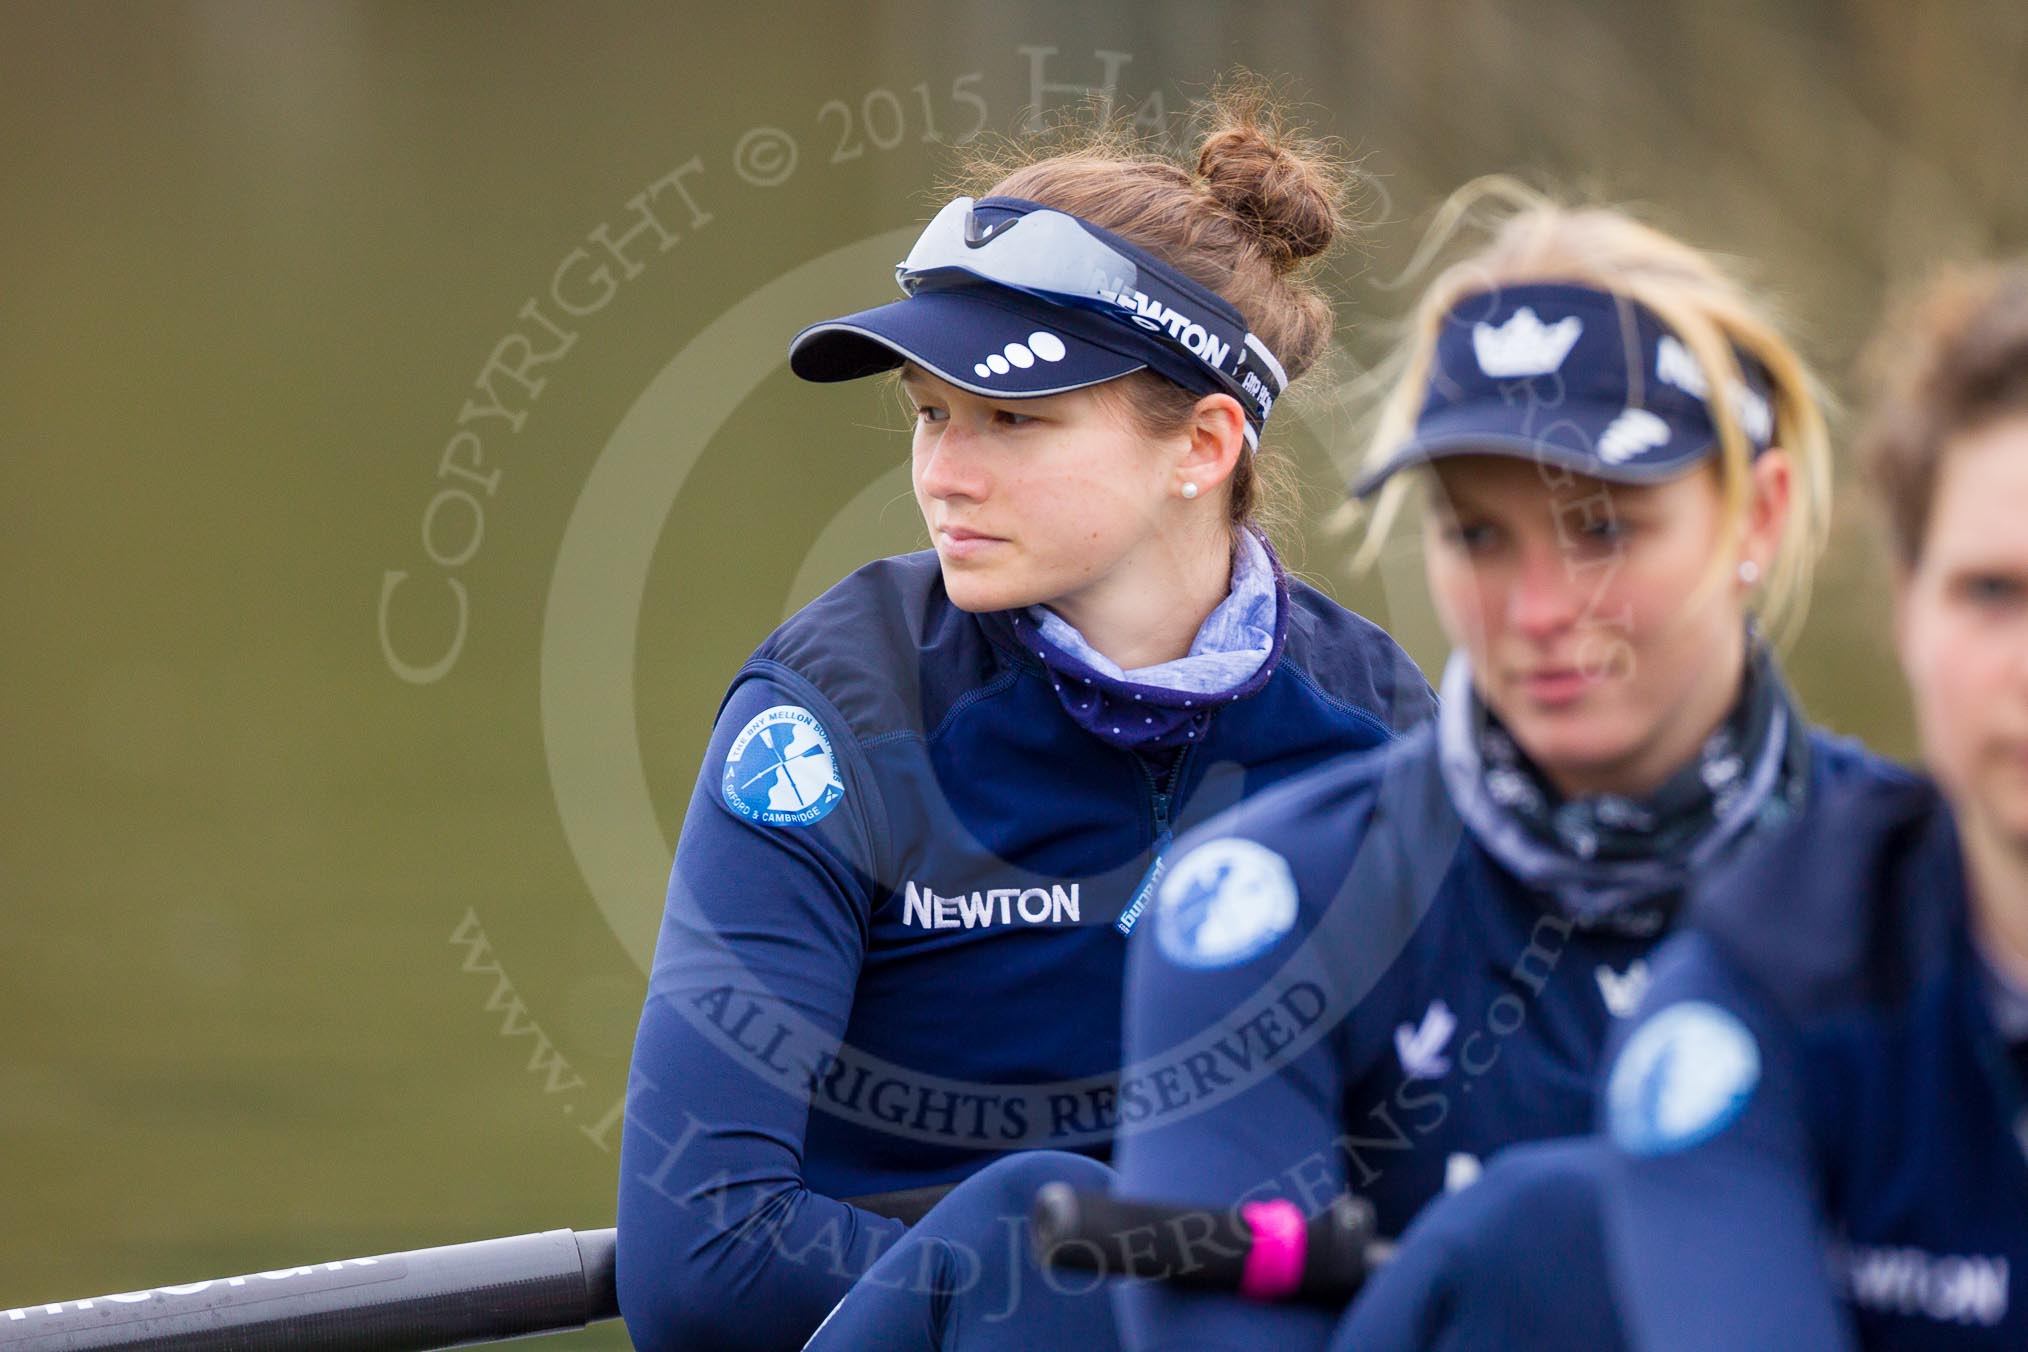 The Boat Race season 2016 - OUWBC training Wallingford: emma Lukasiewicz, bow in the OUWBC Blue Boat.
River Thames,
Wallingford,
Oxfordshire,

on 29 February 2016 at 15:47, image #57